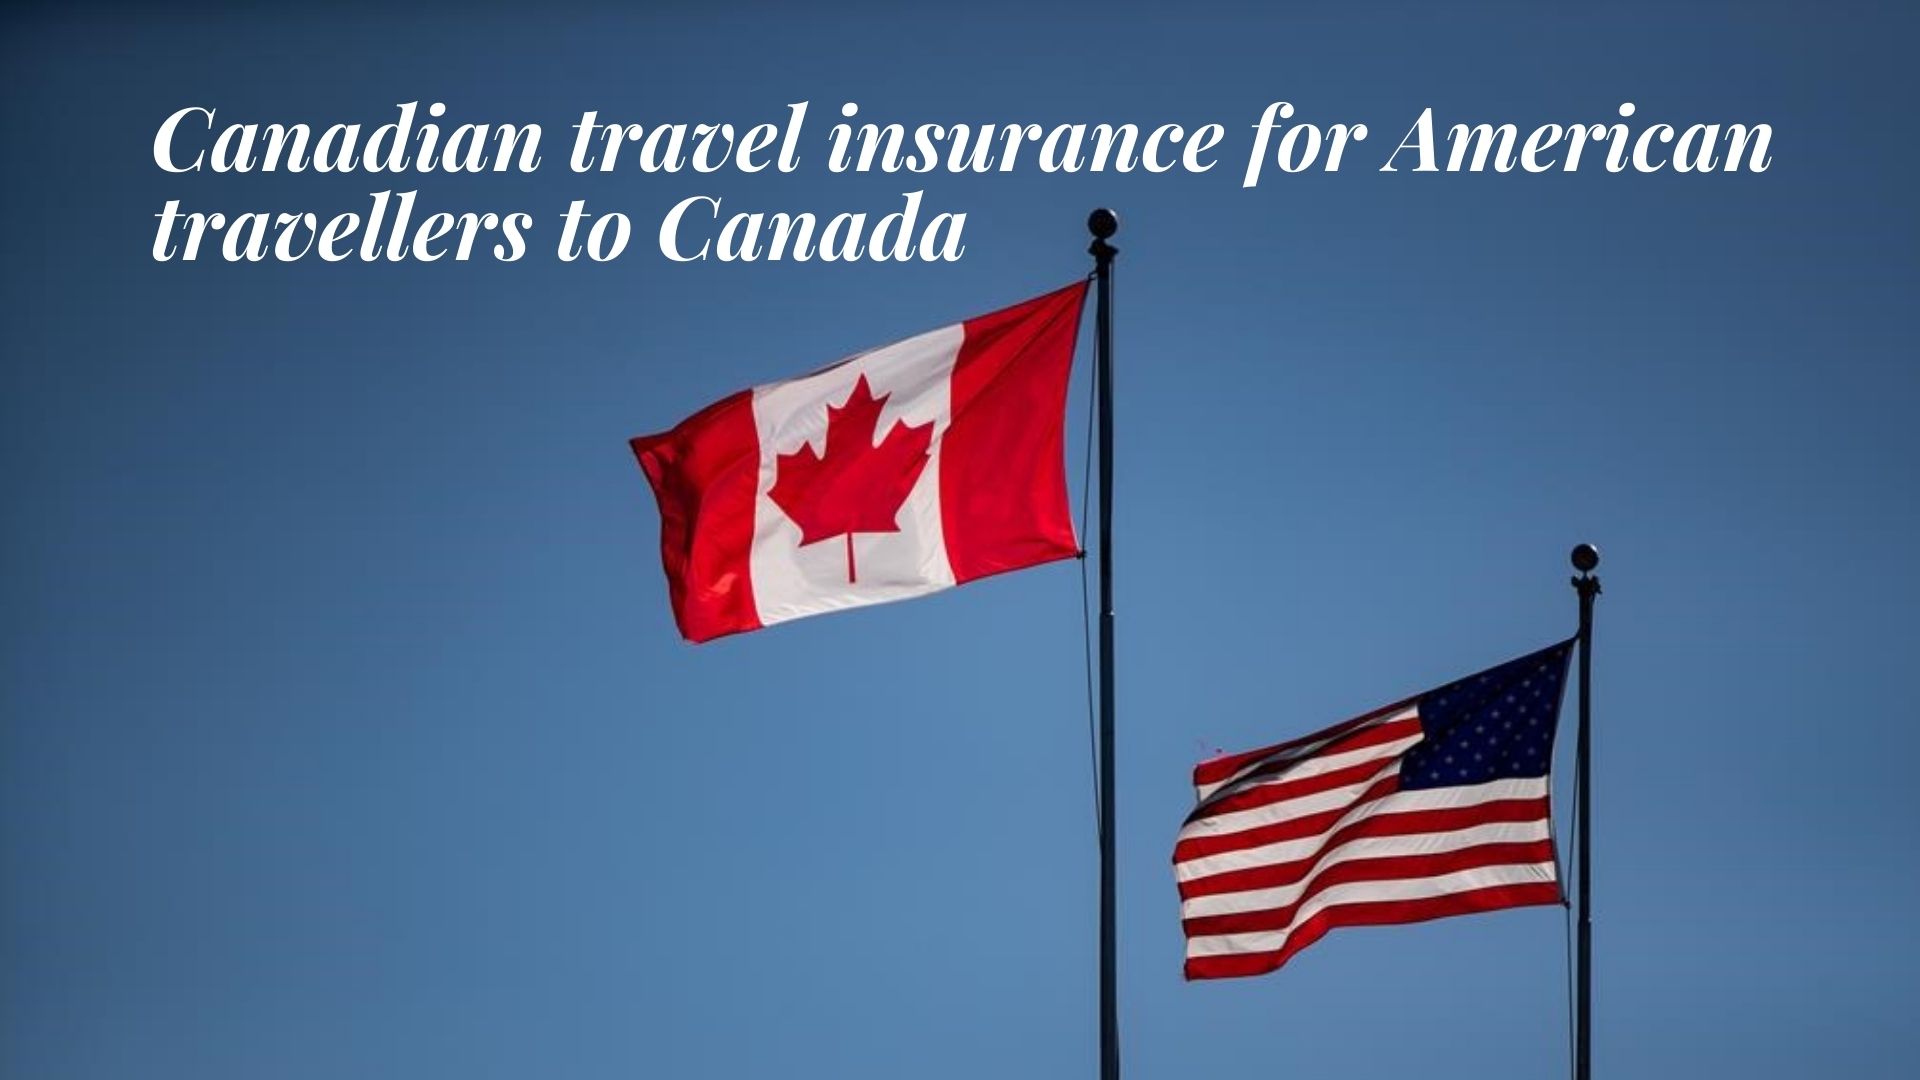 Canadian travel insurance for American travellers to Canada